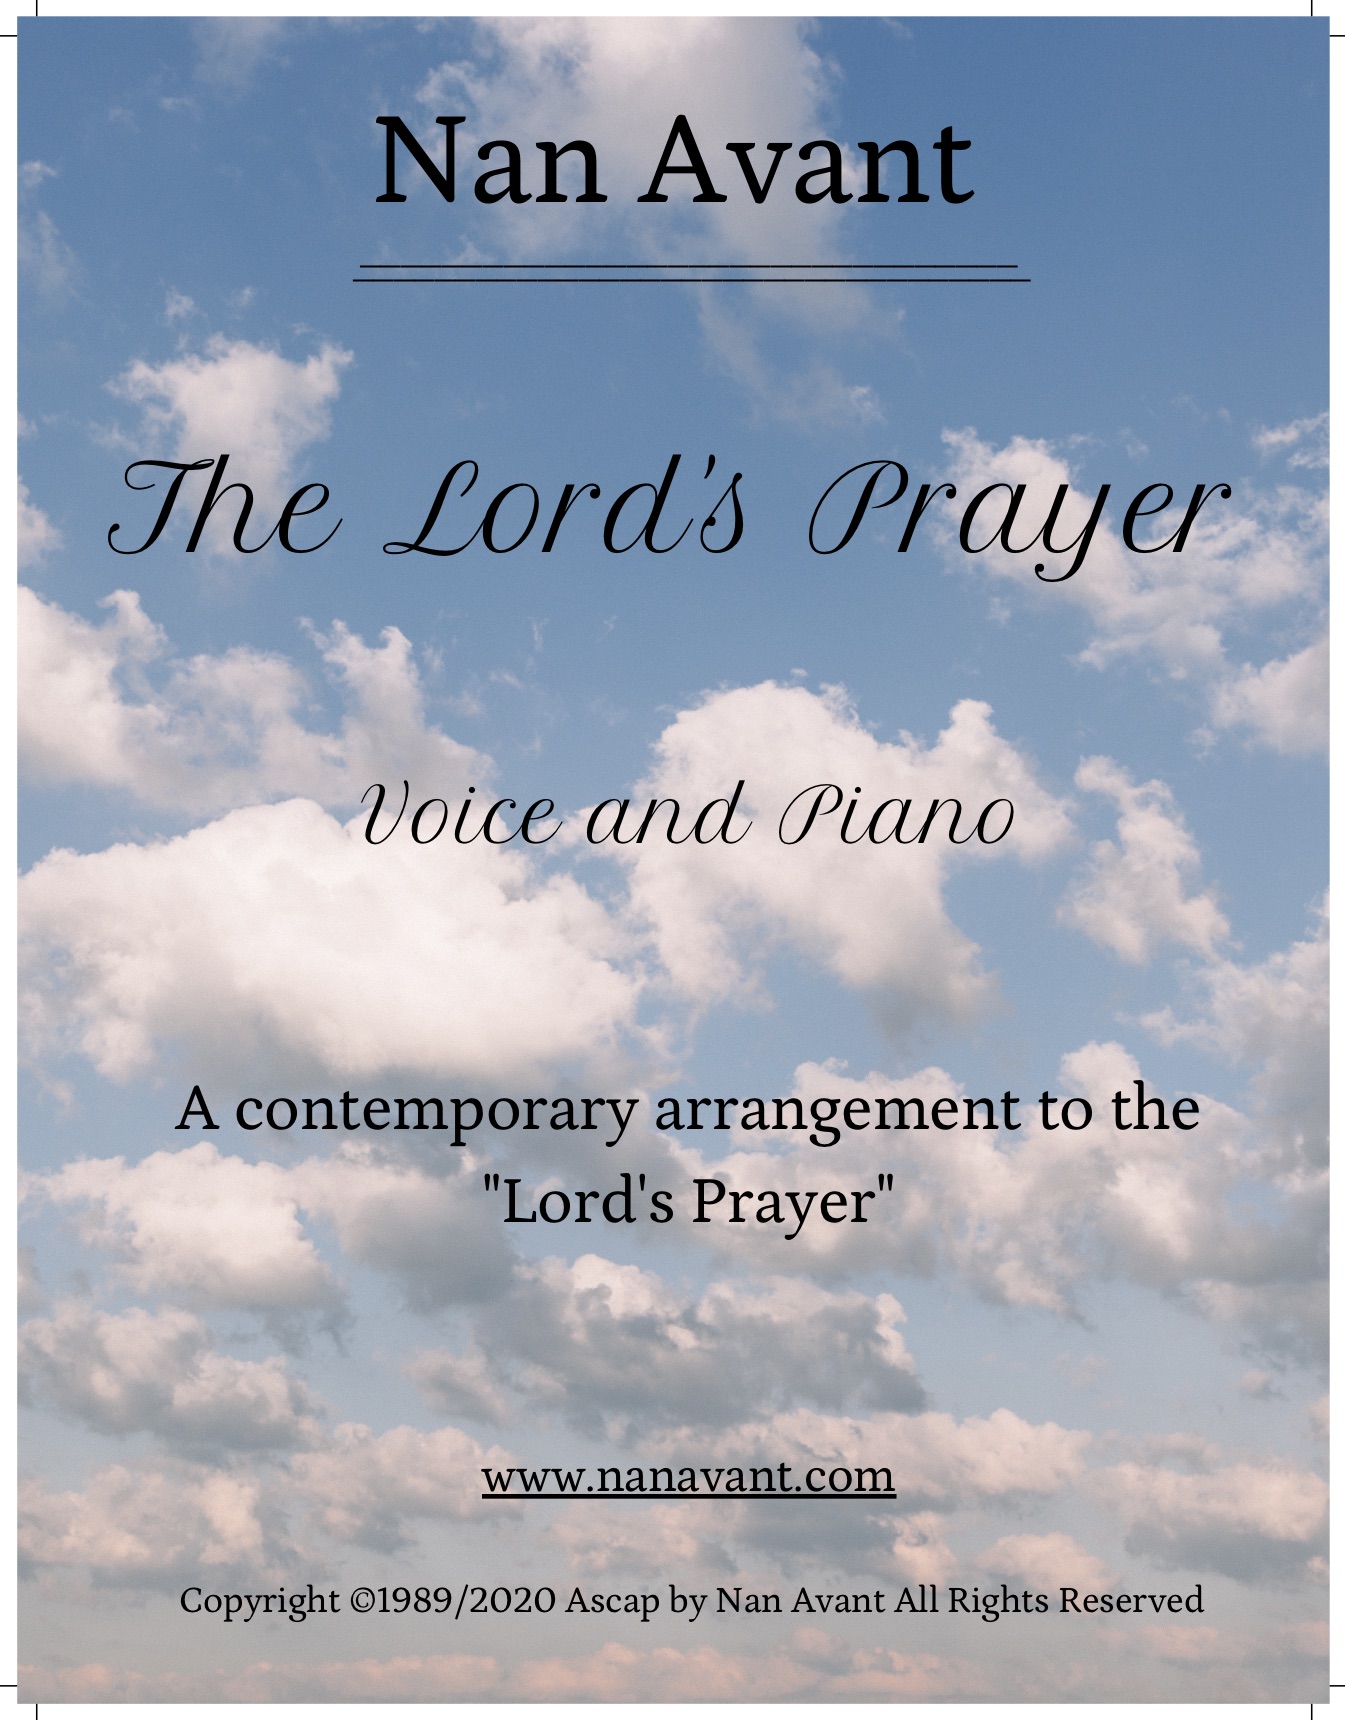 The Lords Prayer Voice:Piano Cover Page by Nan Avant ©1989©2020 Ascap .musx copy (dragged) 2